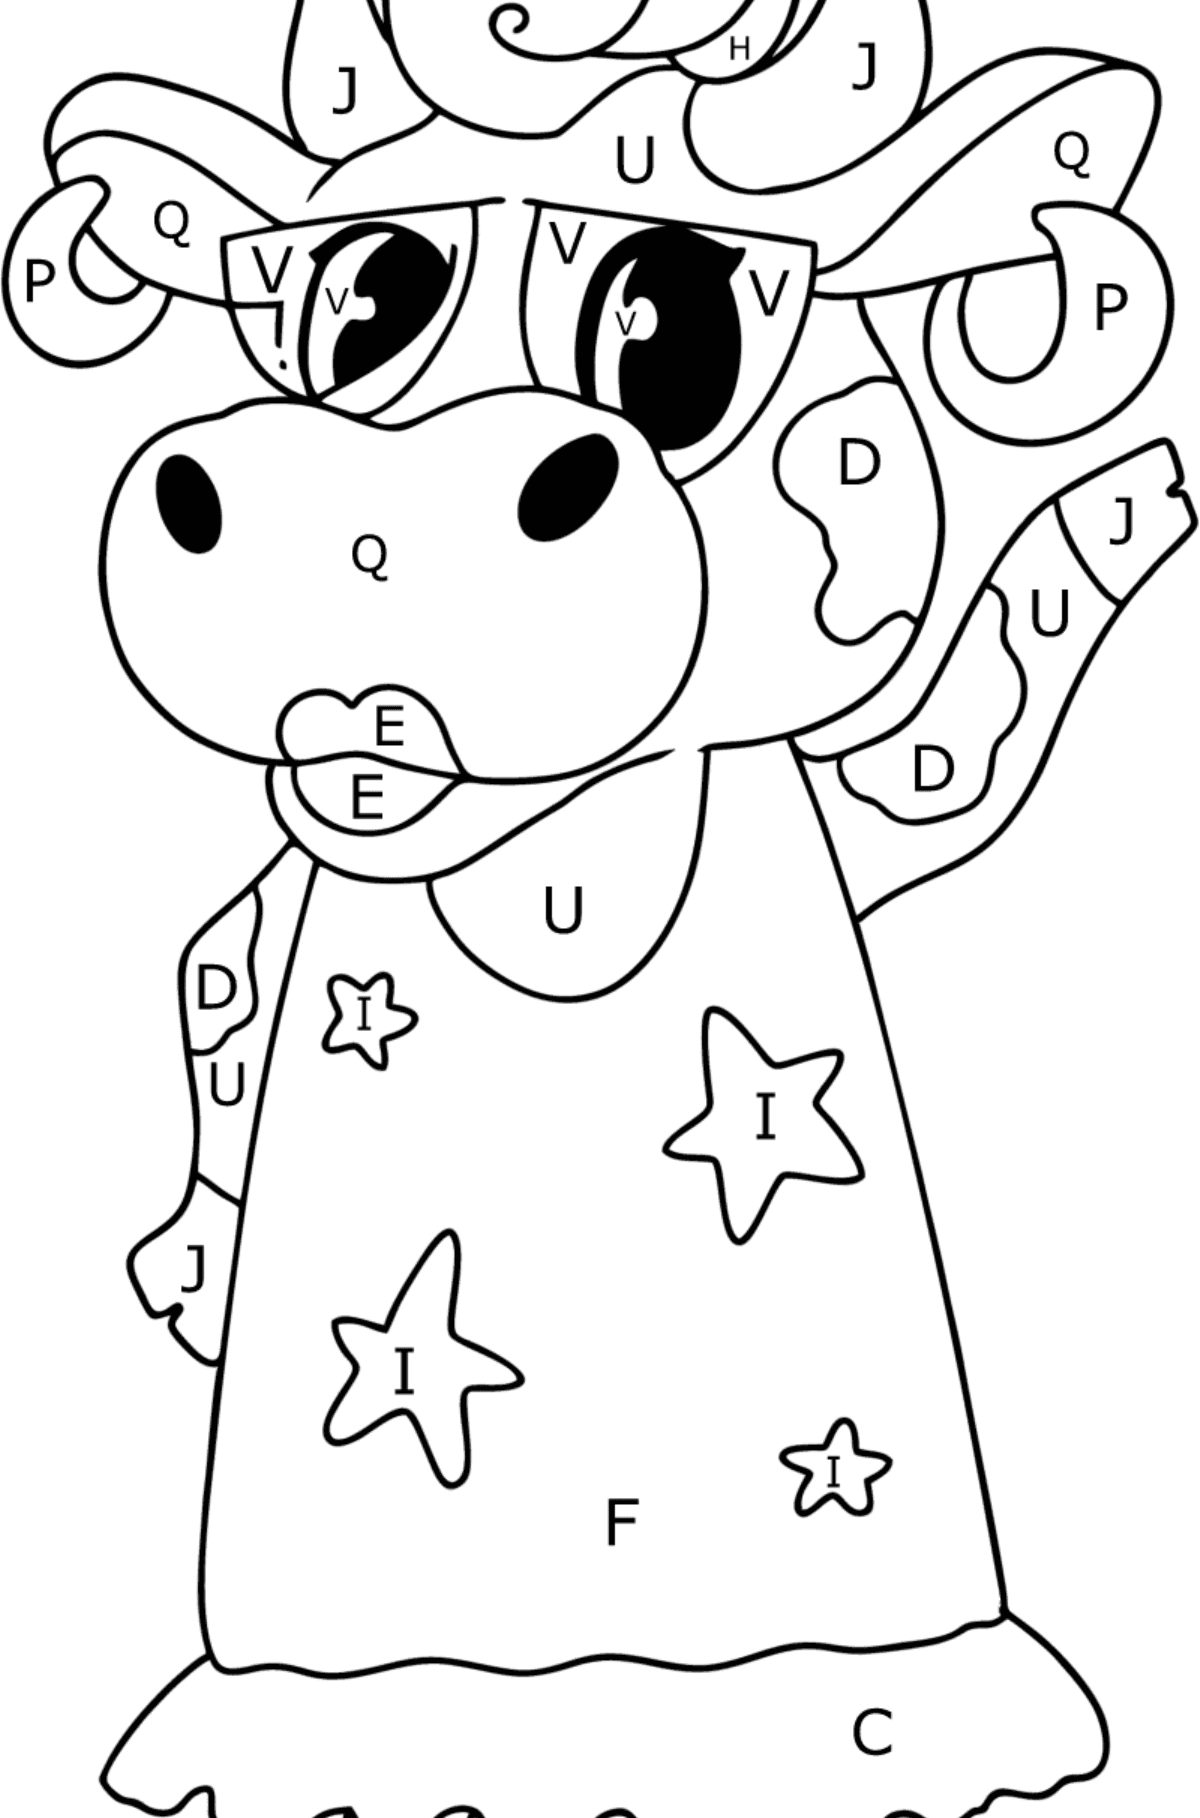 Cartoon cow standing up coloring page - Coloring by Letters for Kids